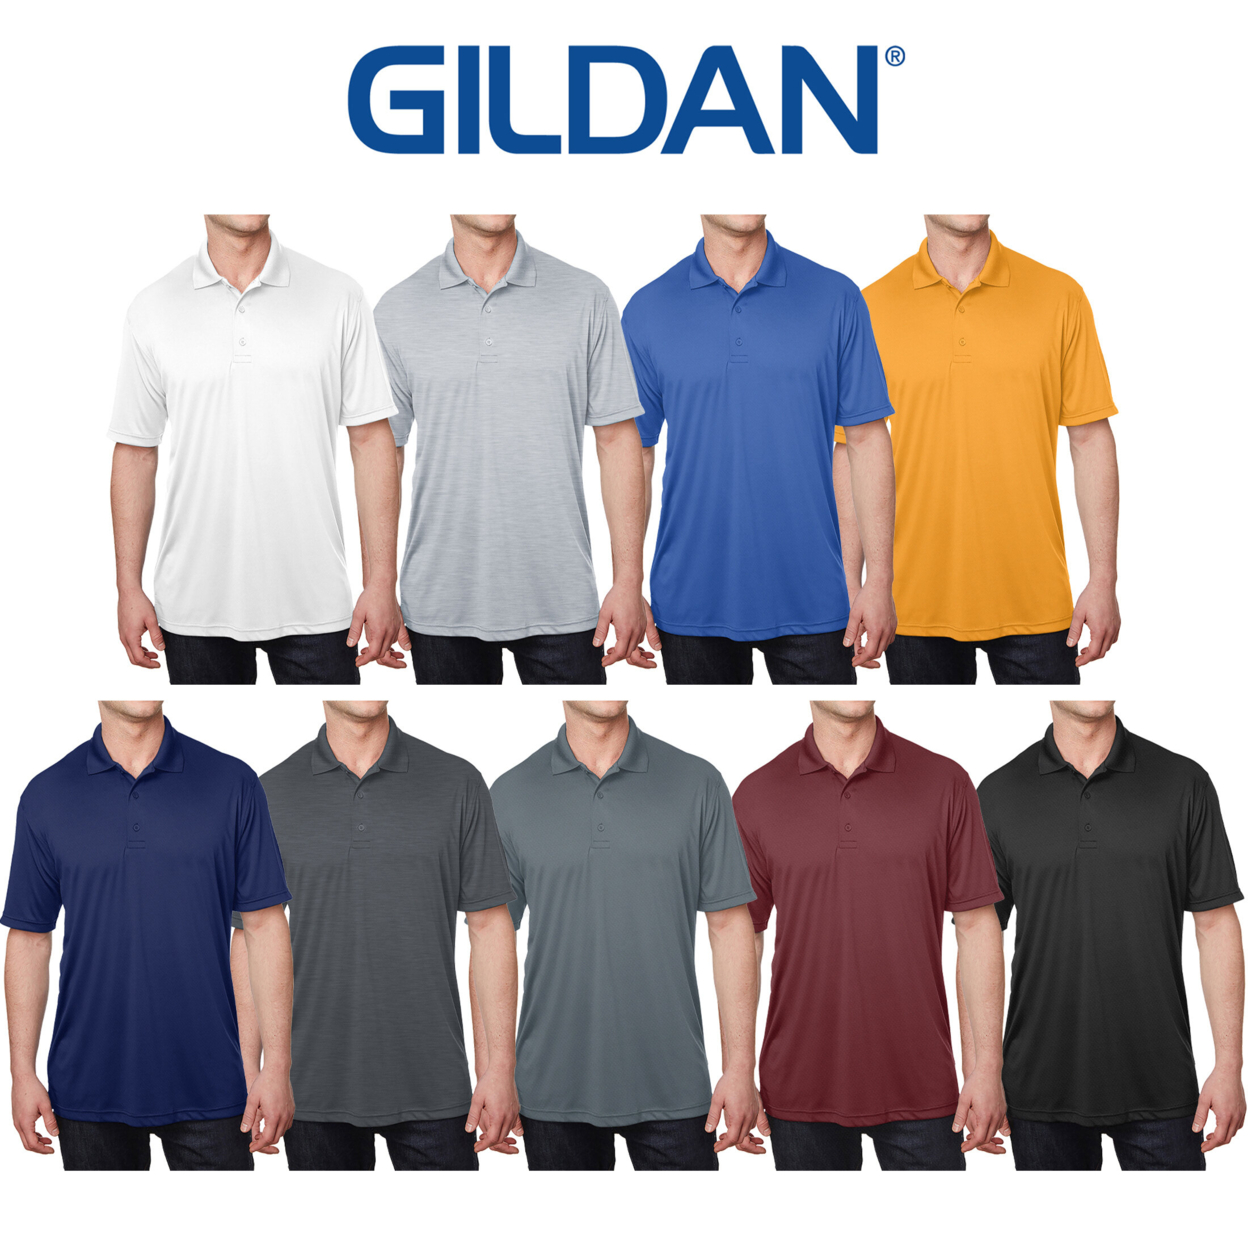 3-Pack Men's Gildan Active Moisture Wicking Dry Fit Polo Shirts - Small